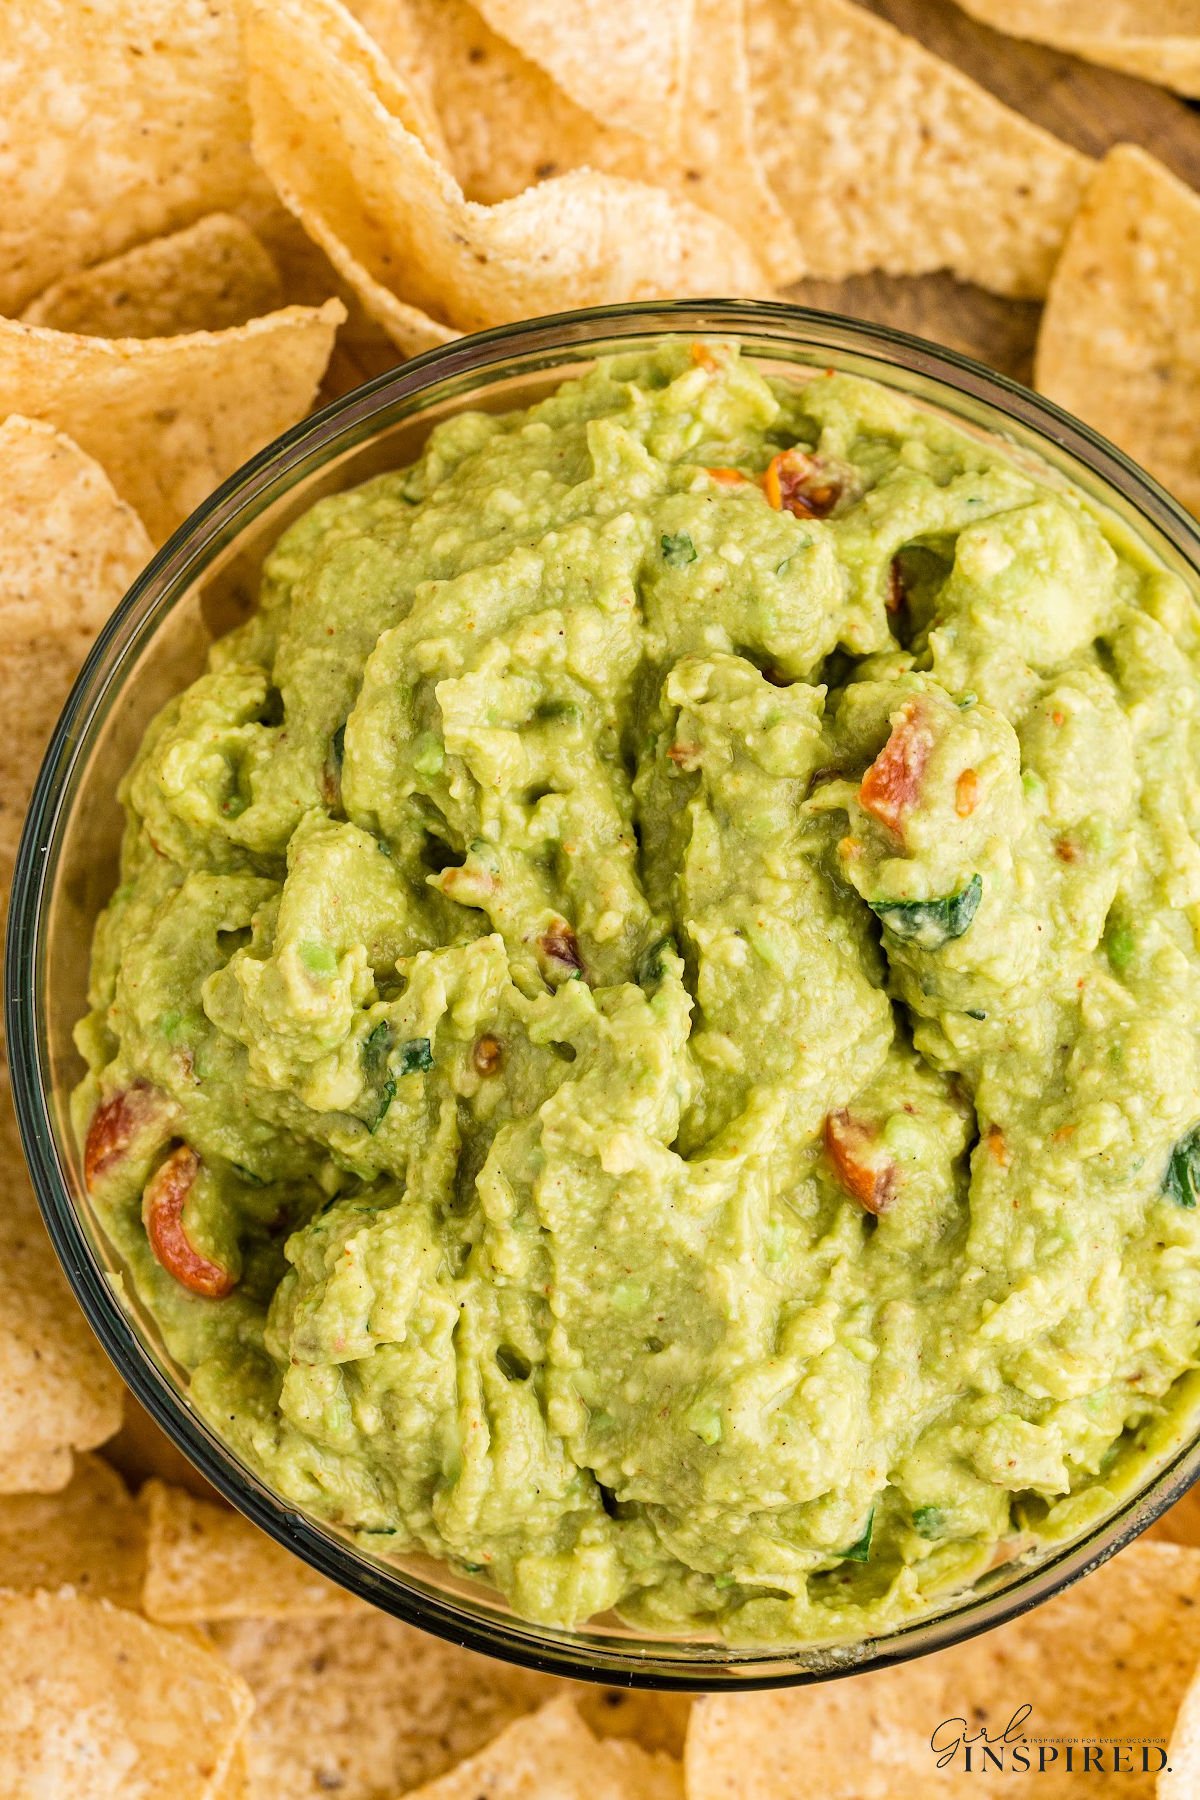 Bowl of guacamole with chips surrounding it.